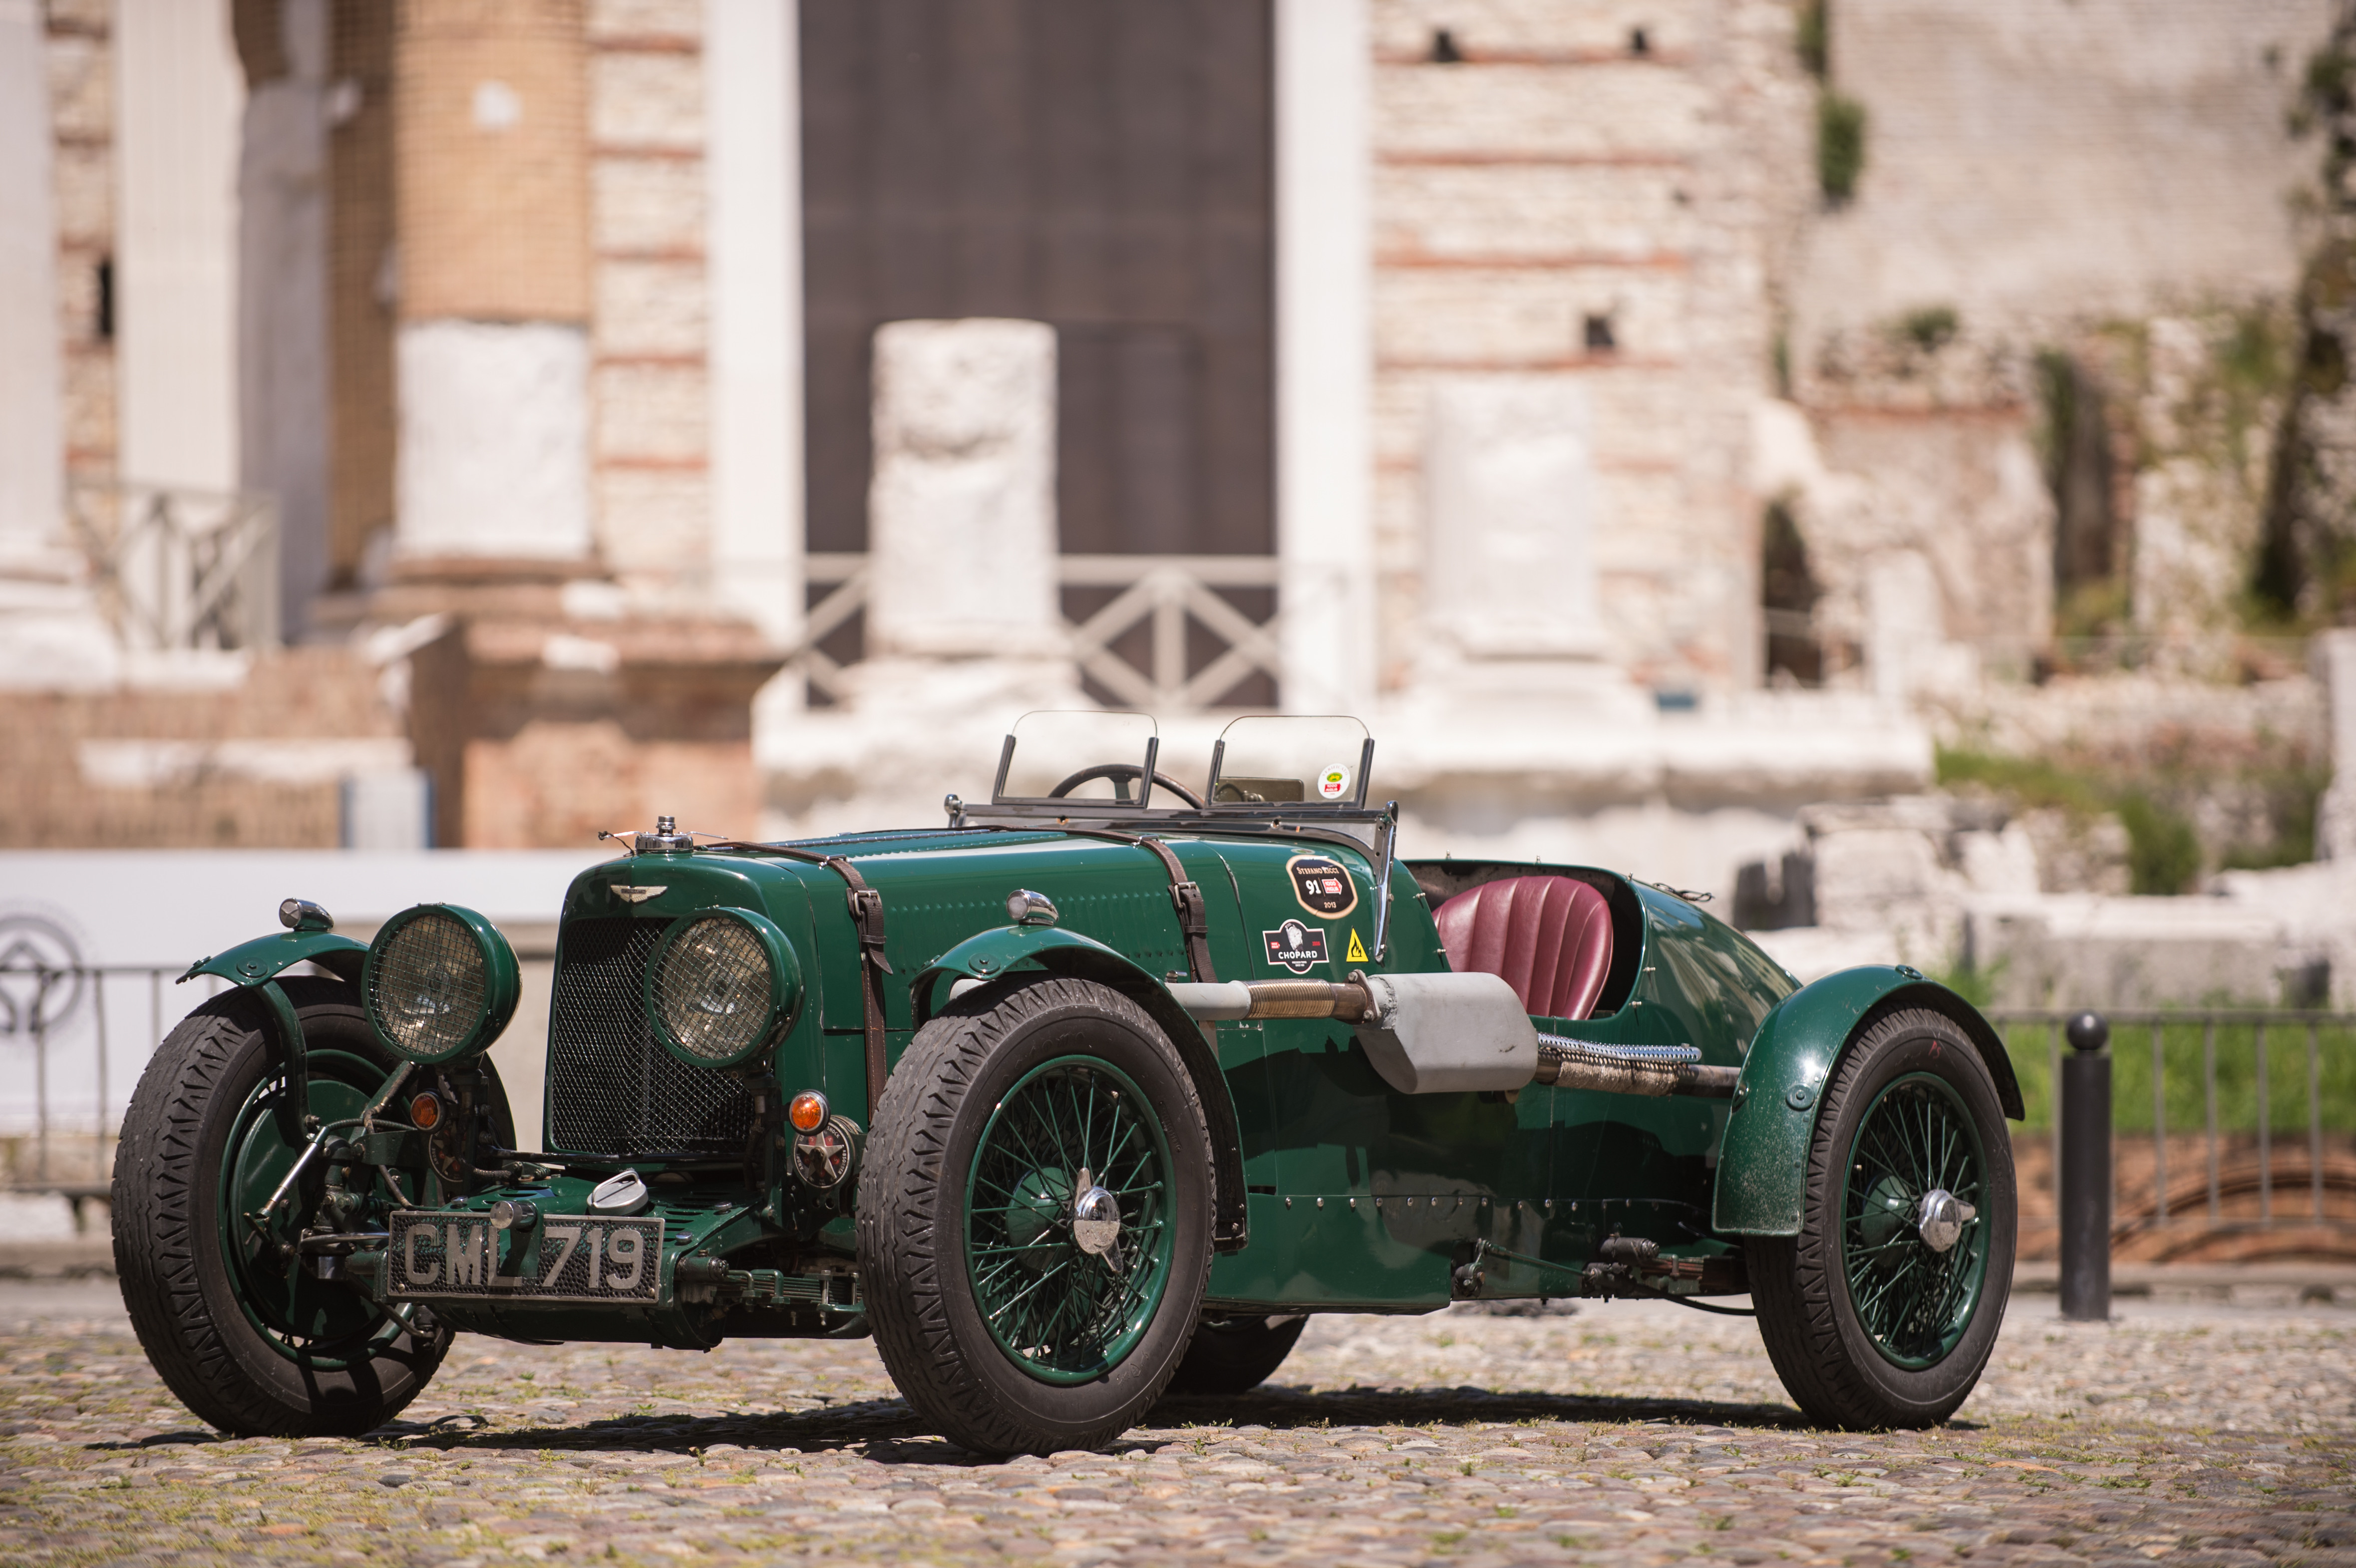 A BRACE OF PRE-WAR ASTON MARTINS LEAD THE CHARGE FOR BRITISH MARQUES AT GRAND PALAIS SALE cover